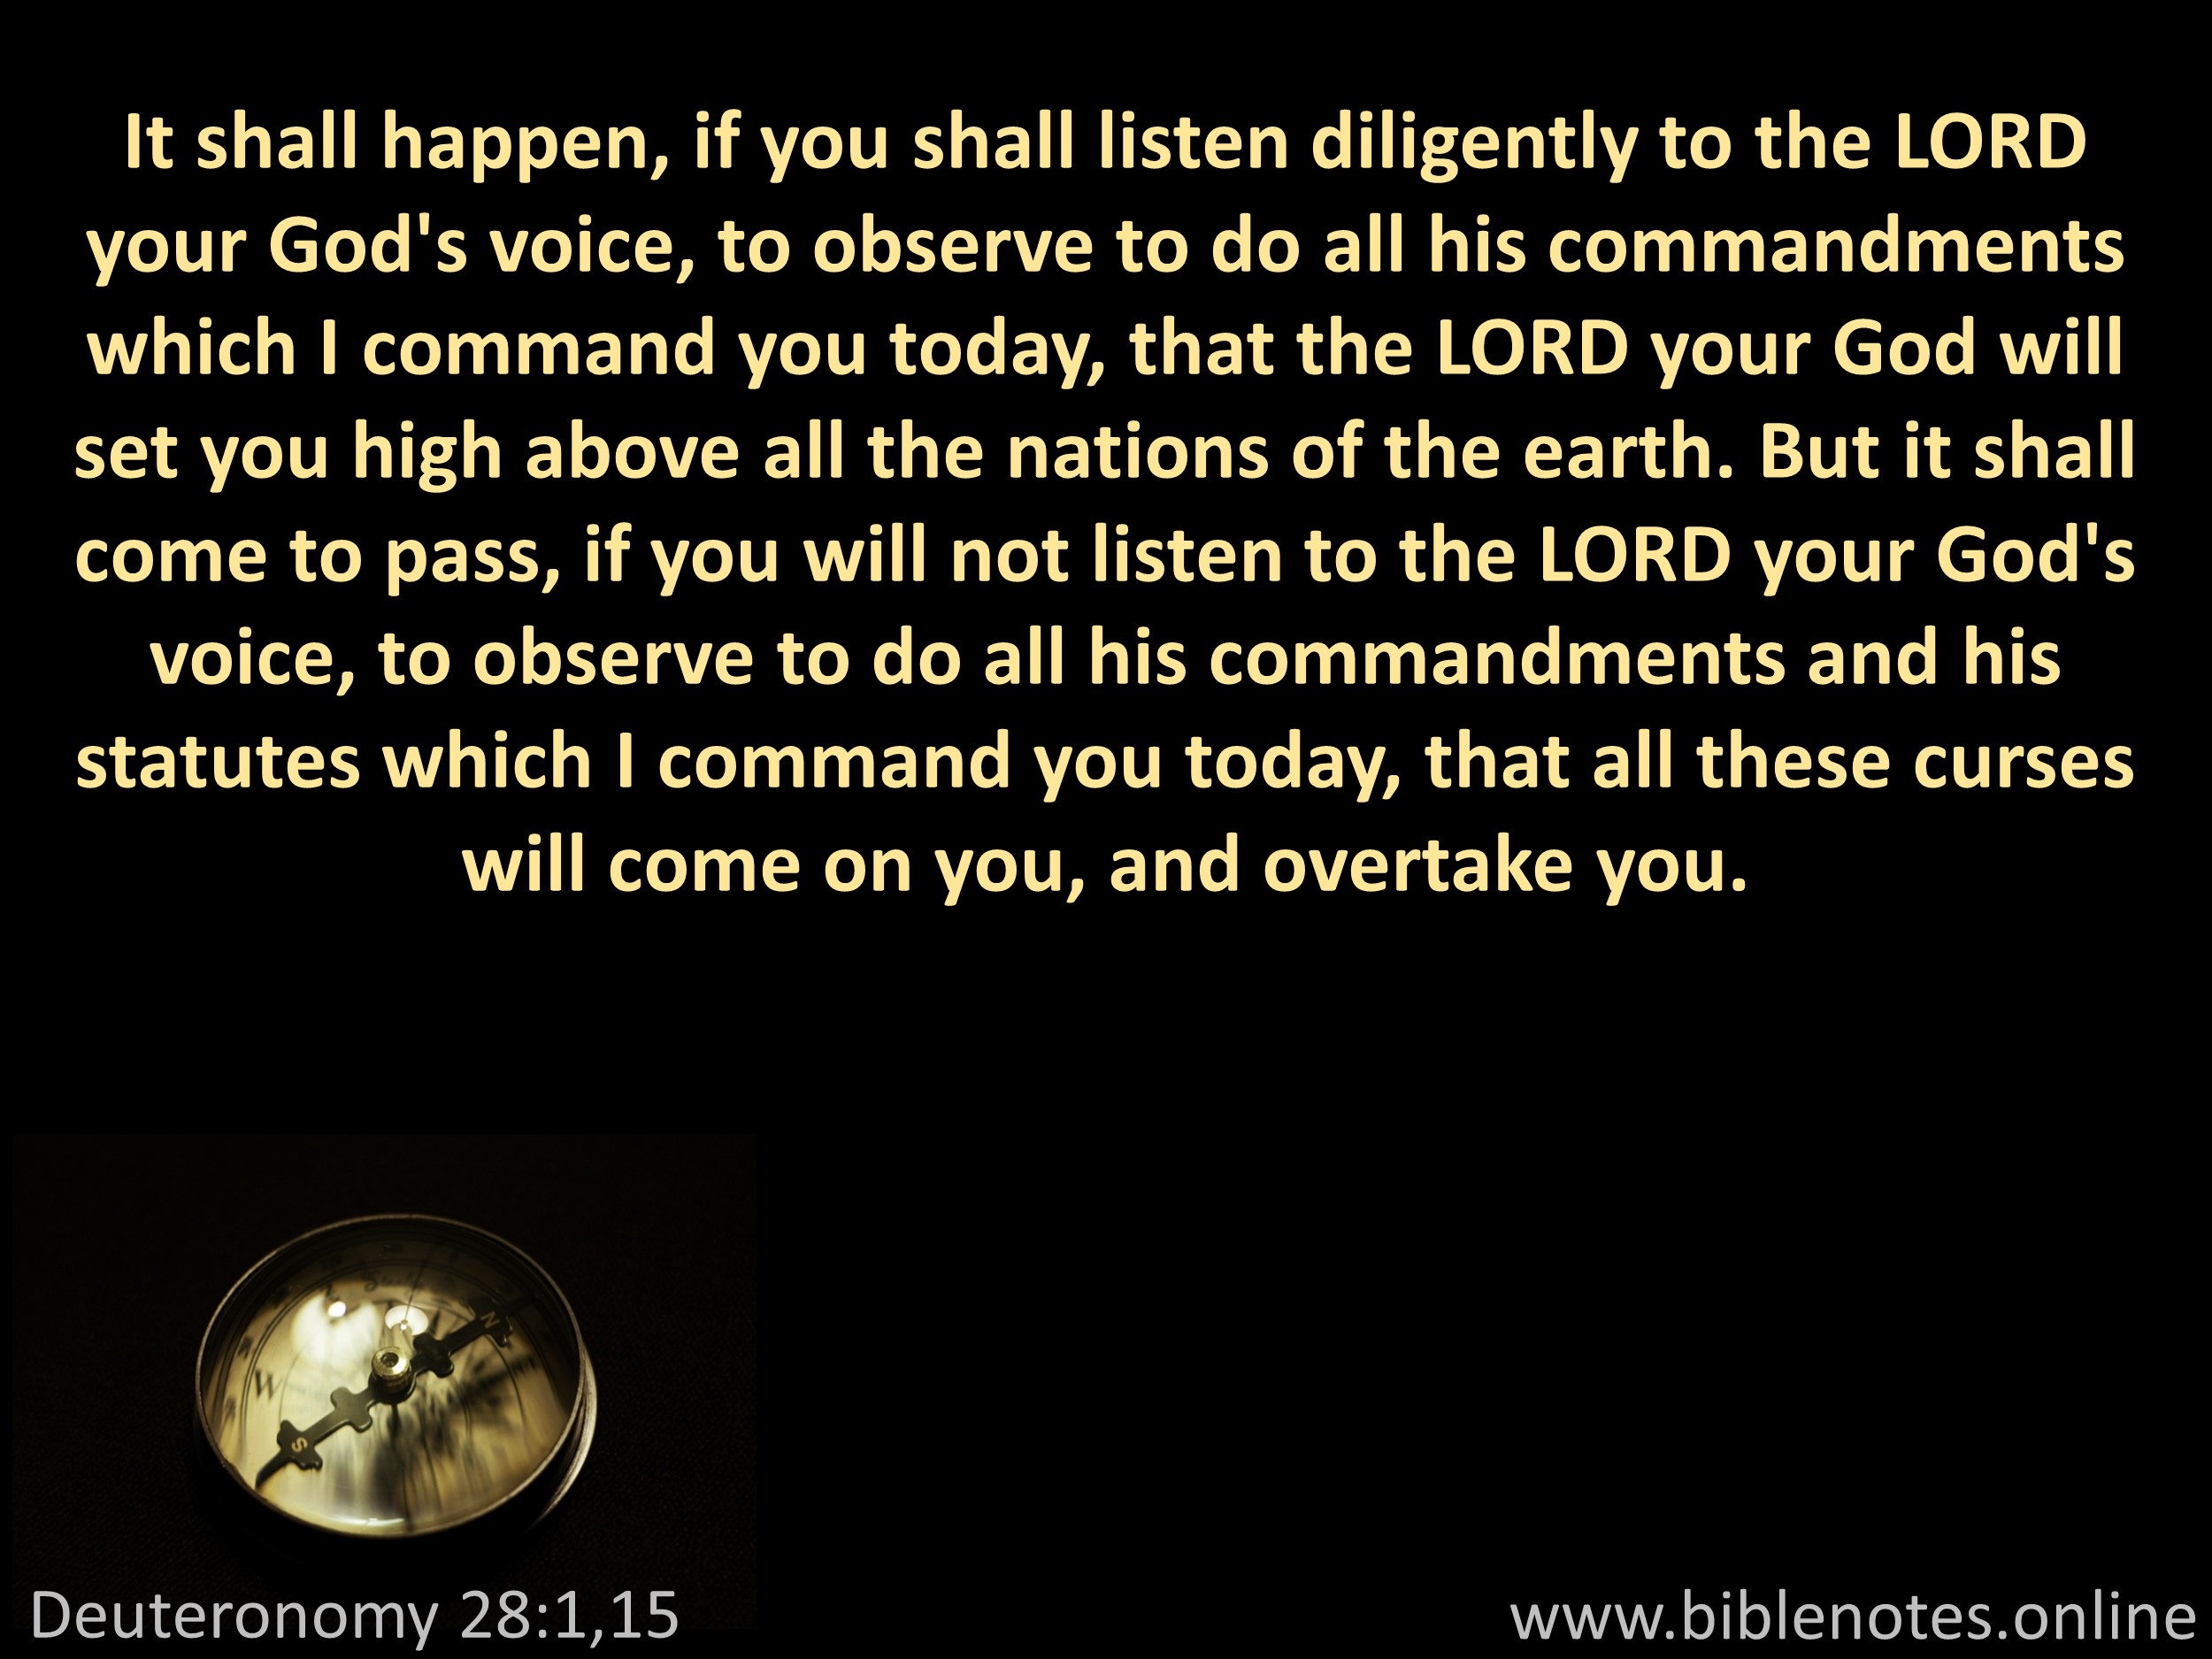 Bible Verse from Deuteronomy Chapter 28